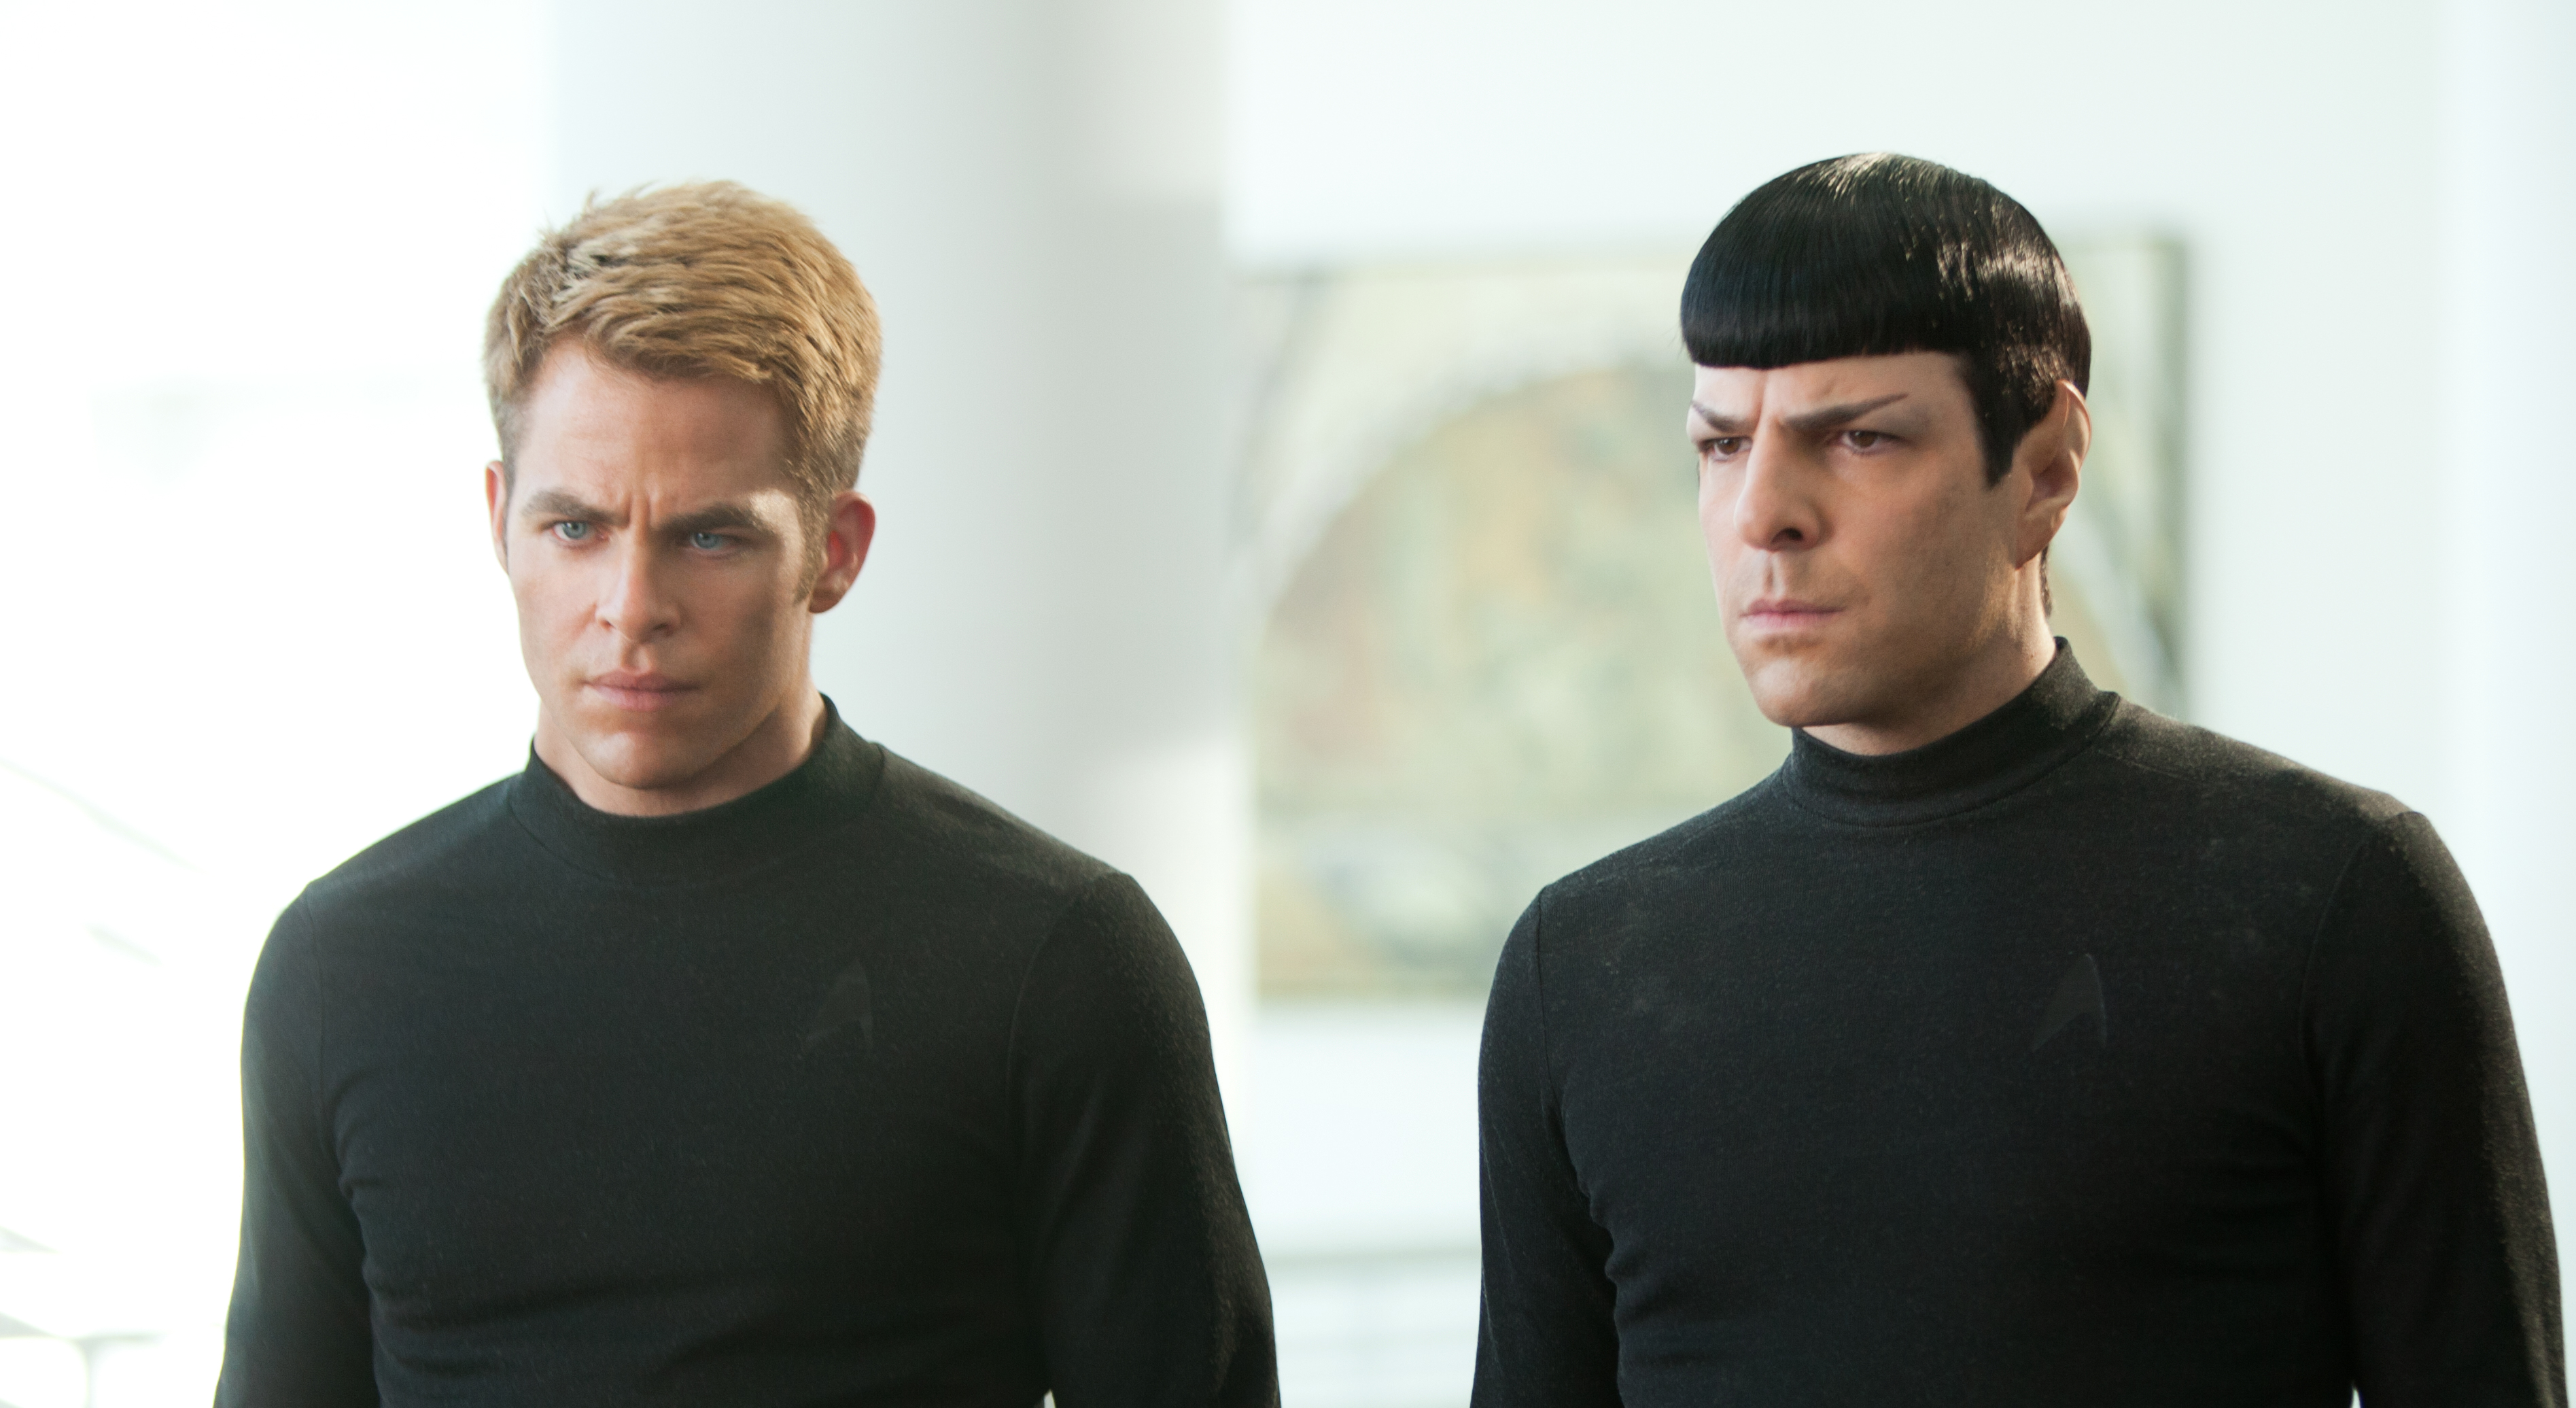 Star-Trek-Into-Darkness-Chris-Pine-and-Zachary-Quinto